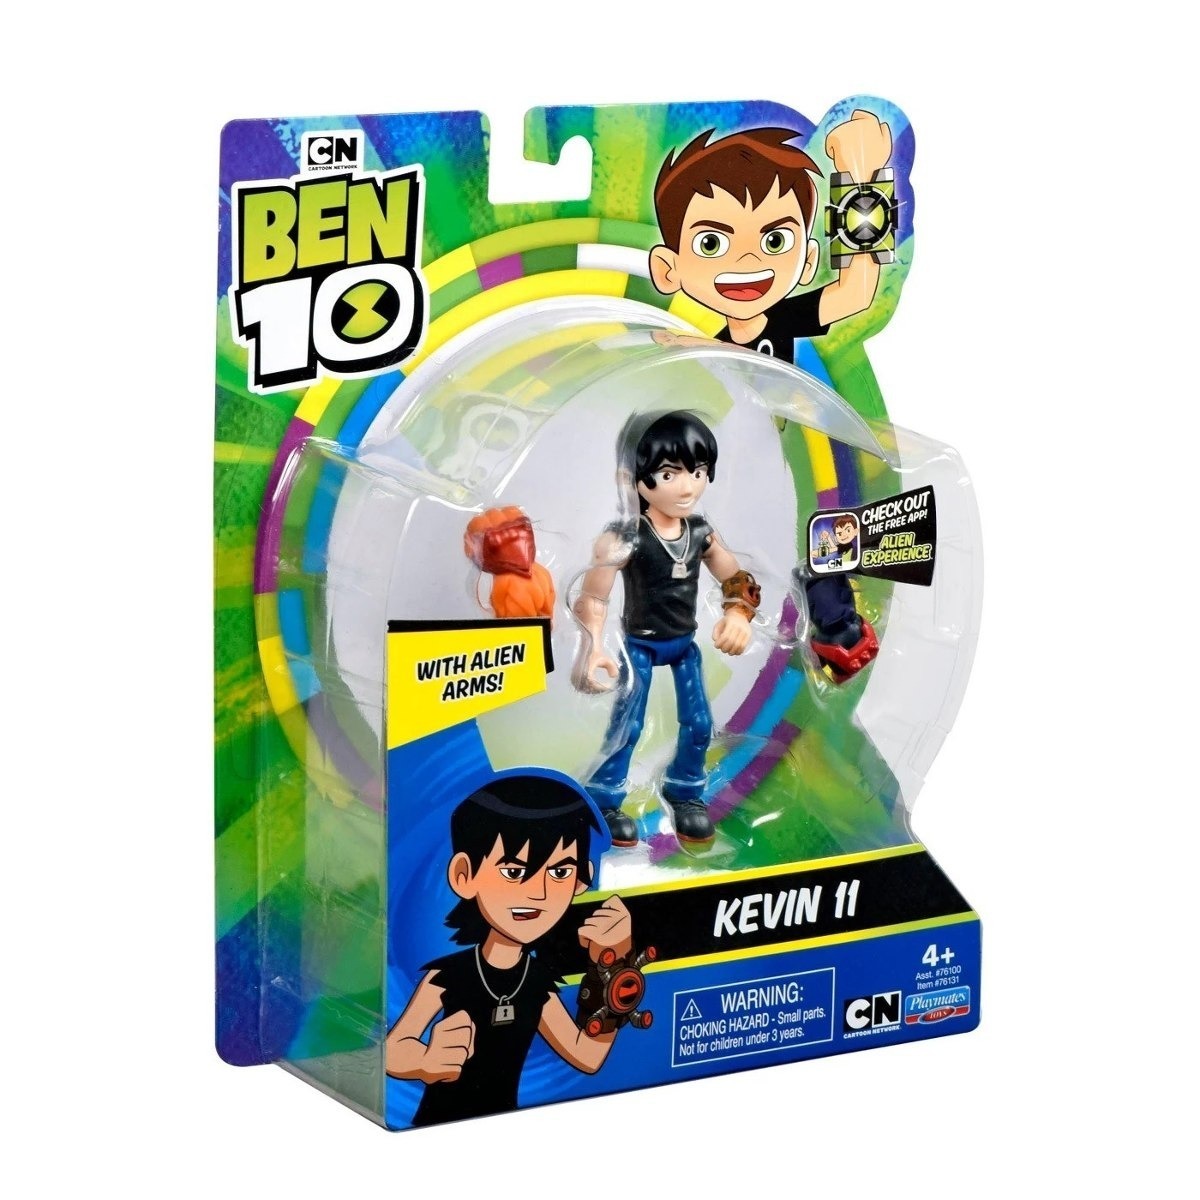 kevin 11 action figure